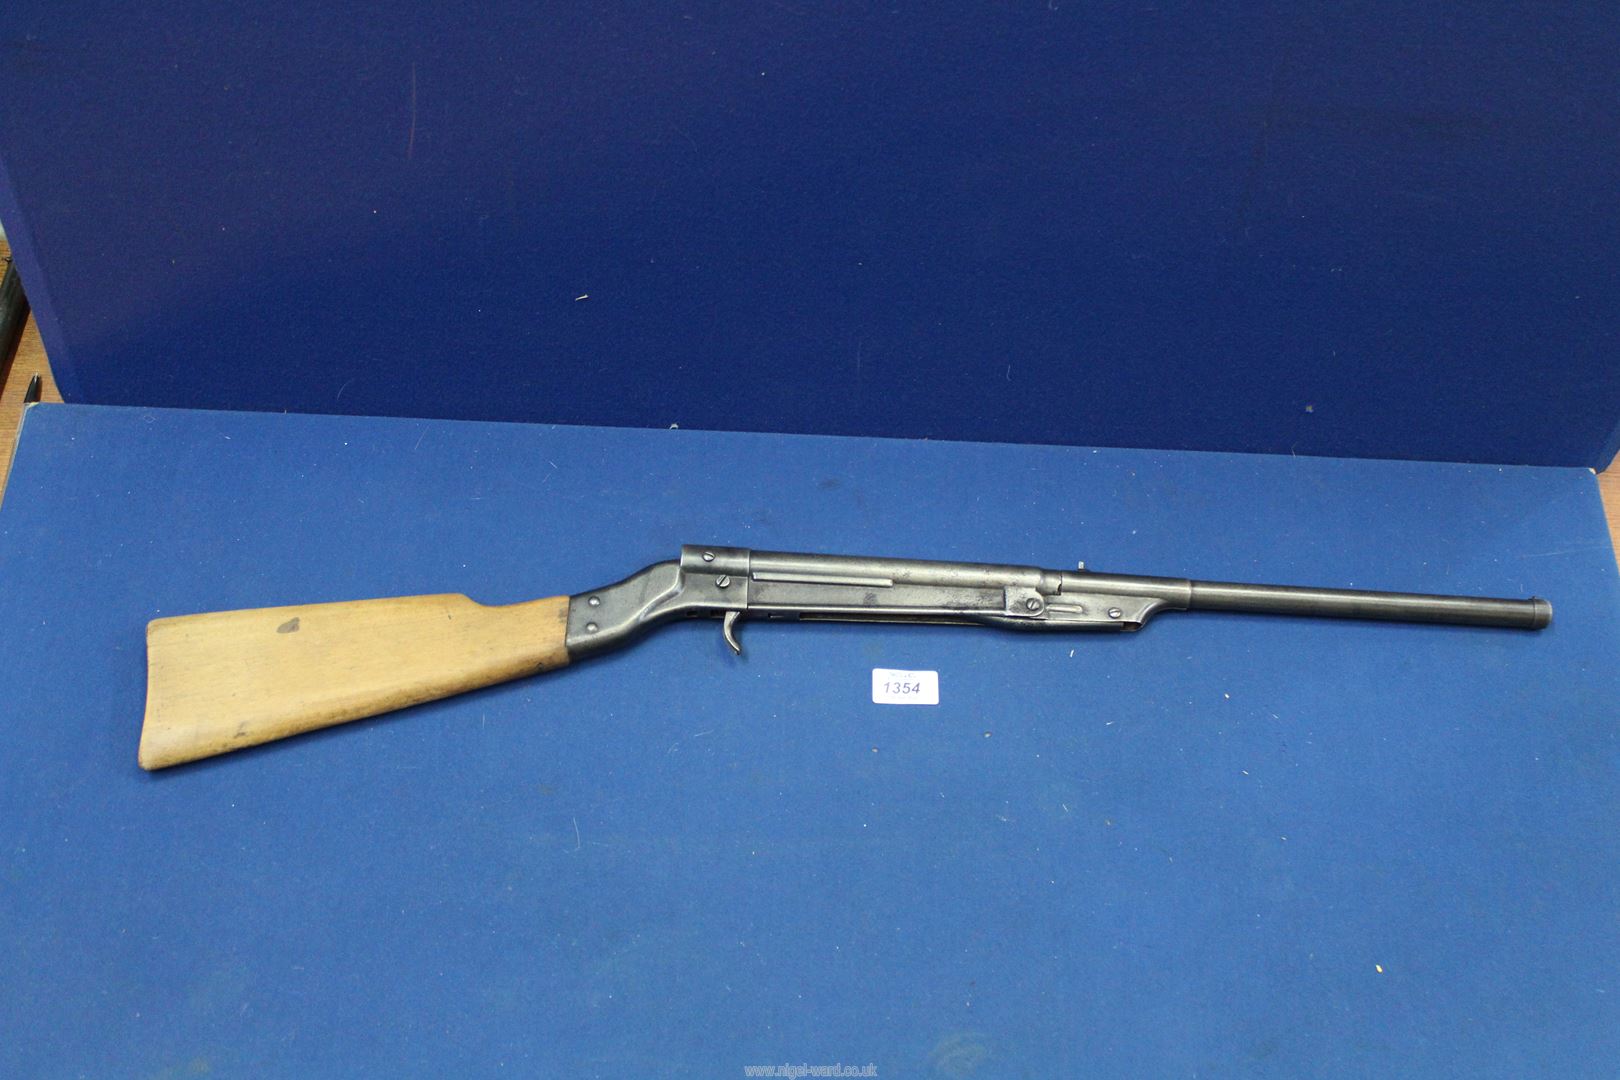 A vintage Diana .177 break action air Rifle, made in Germany, model .